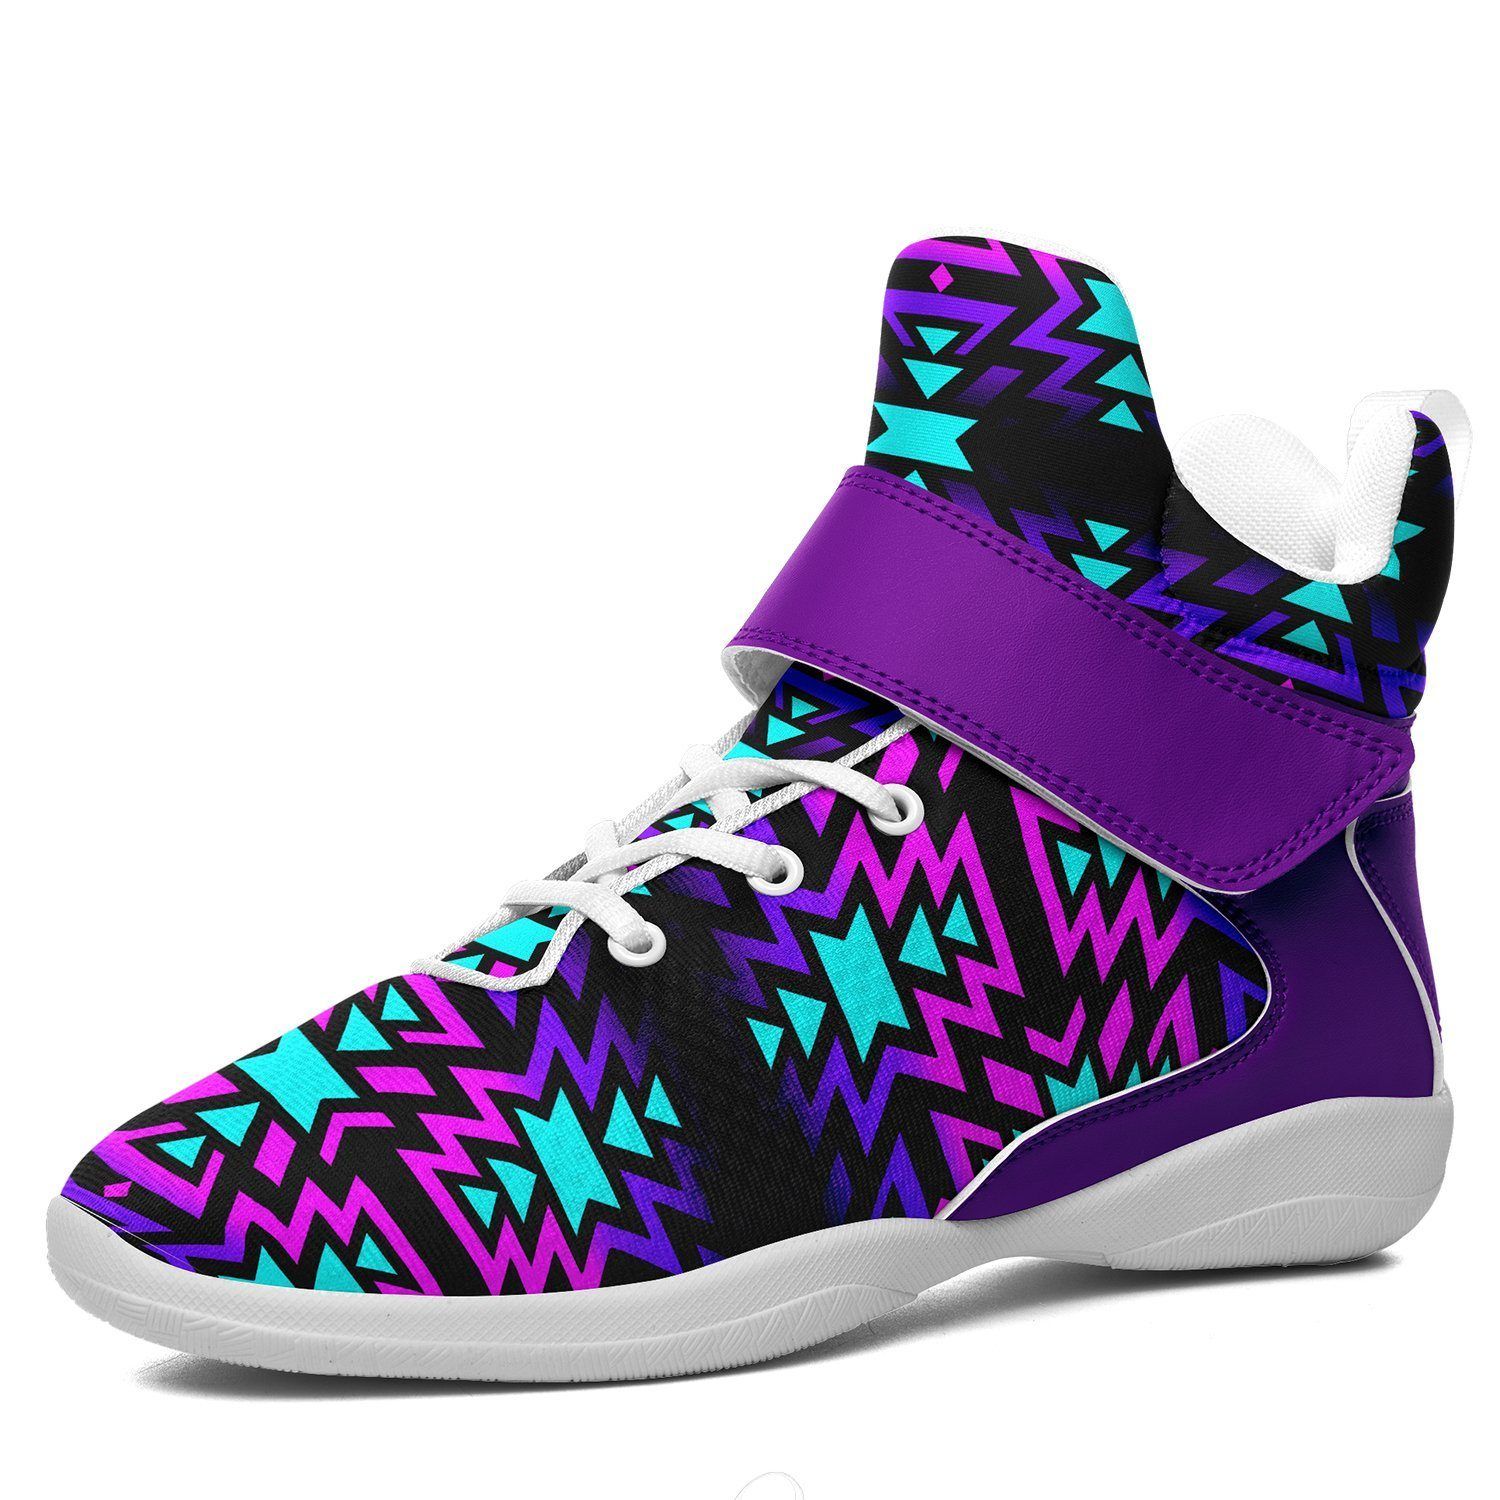 Black Fire Winter Sunset Ipottaa Basketball / Sport High Top Shoes - White Sole 49 Dzine US Men 7 / EUR 40 White Sole with Indigo Strap 